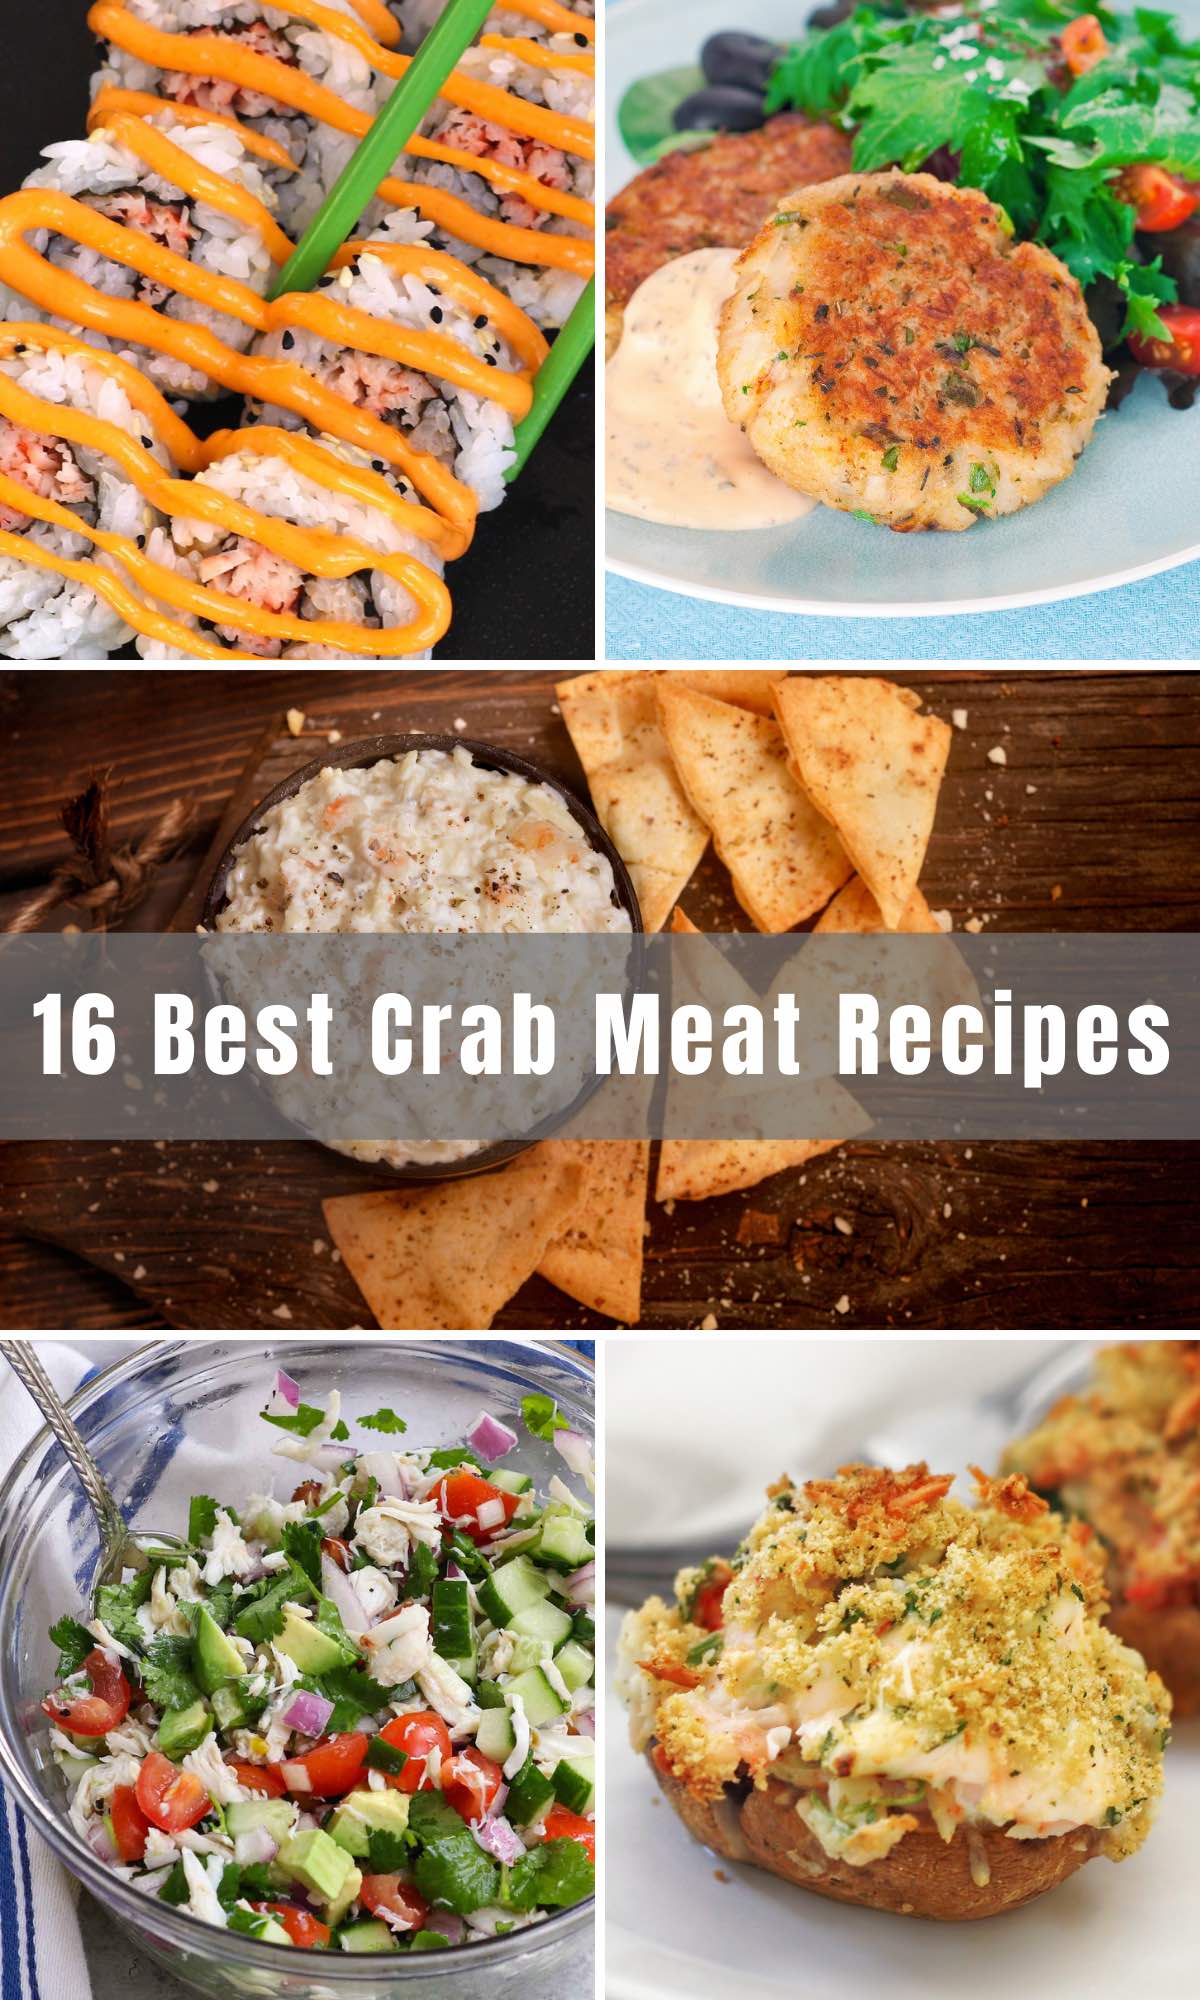 Low in fat and high in protein, crab meat is an affordable alternative to lobster. It’s easy to work with and cooks quickly, so you can satisfy your seafood craving even faster. We’ve rounded up 16 Best Crab Meat Recipes from appetizers, salad, sushi, and more.